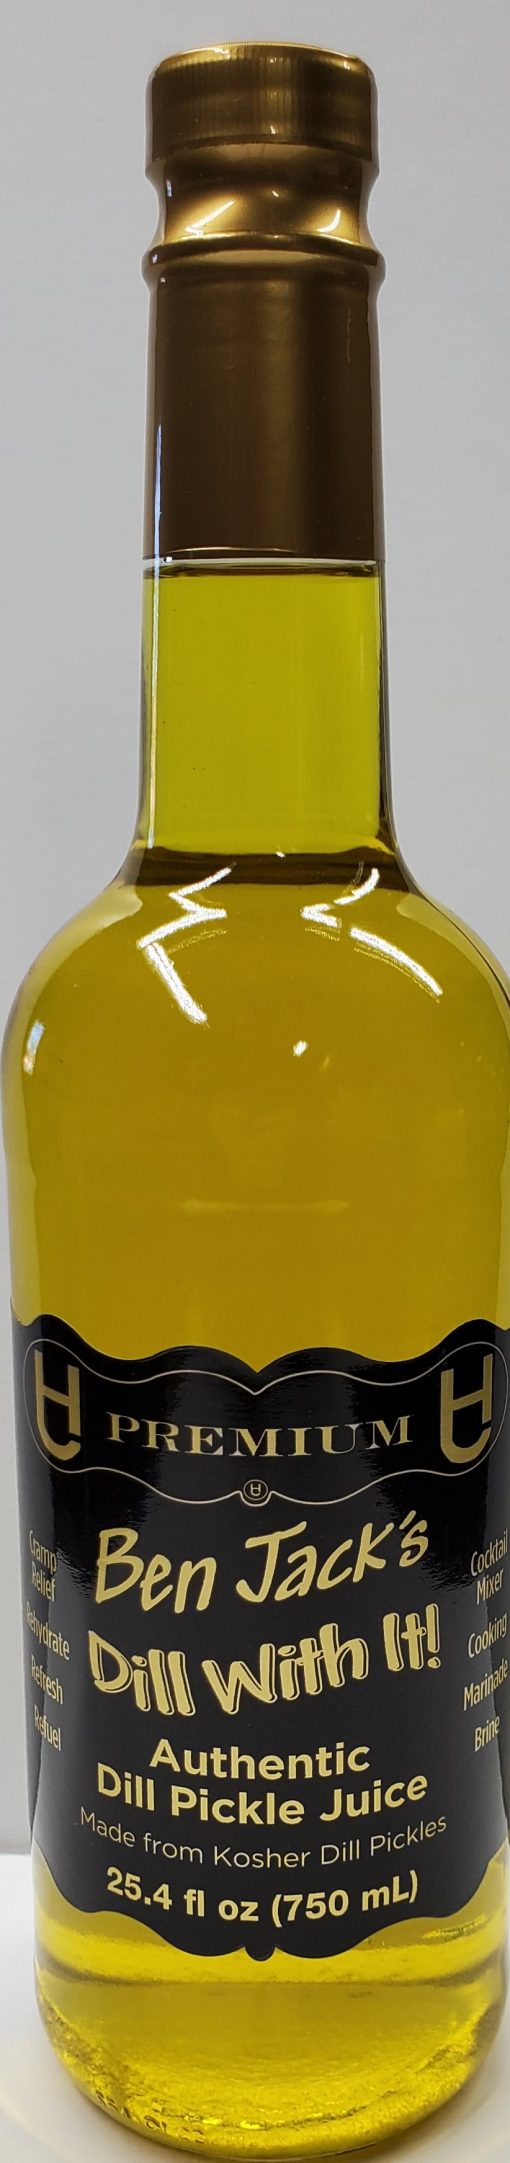 New!!! Dill With IT! Dill Pickle Juice 25.4oz